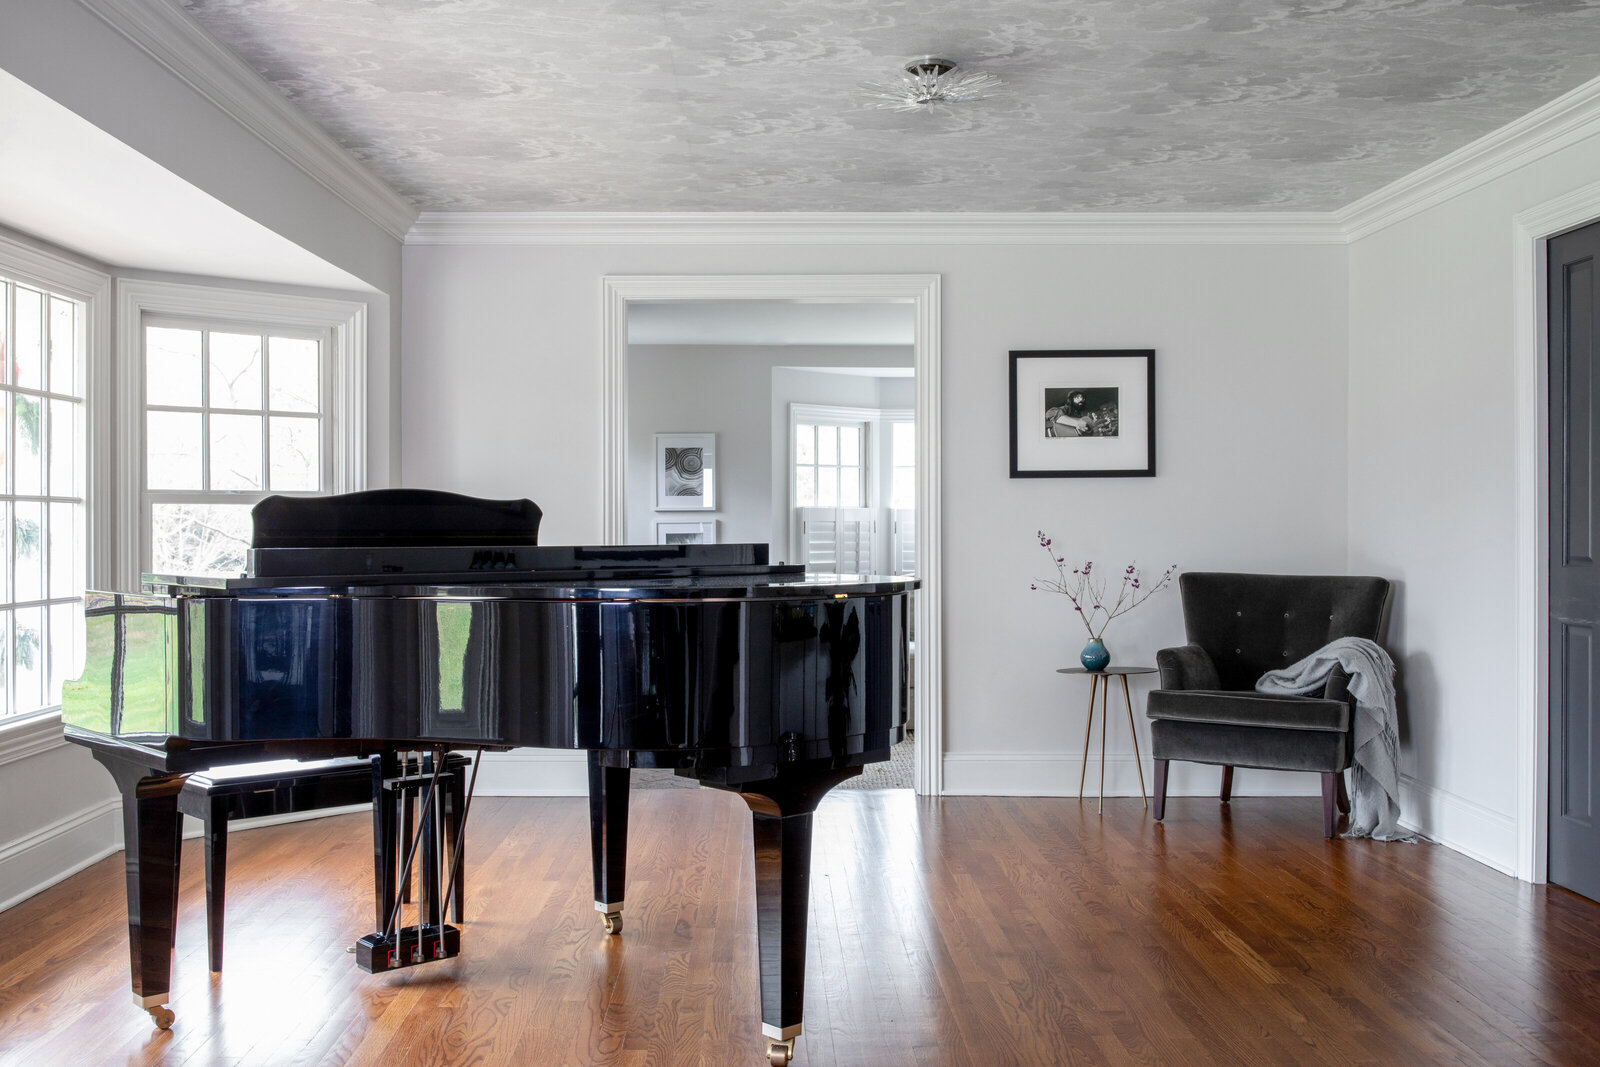 BABY-GRAND-PIANO-MUSIC-ROOM-WALLPAPER-ON-CEILING